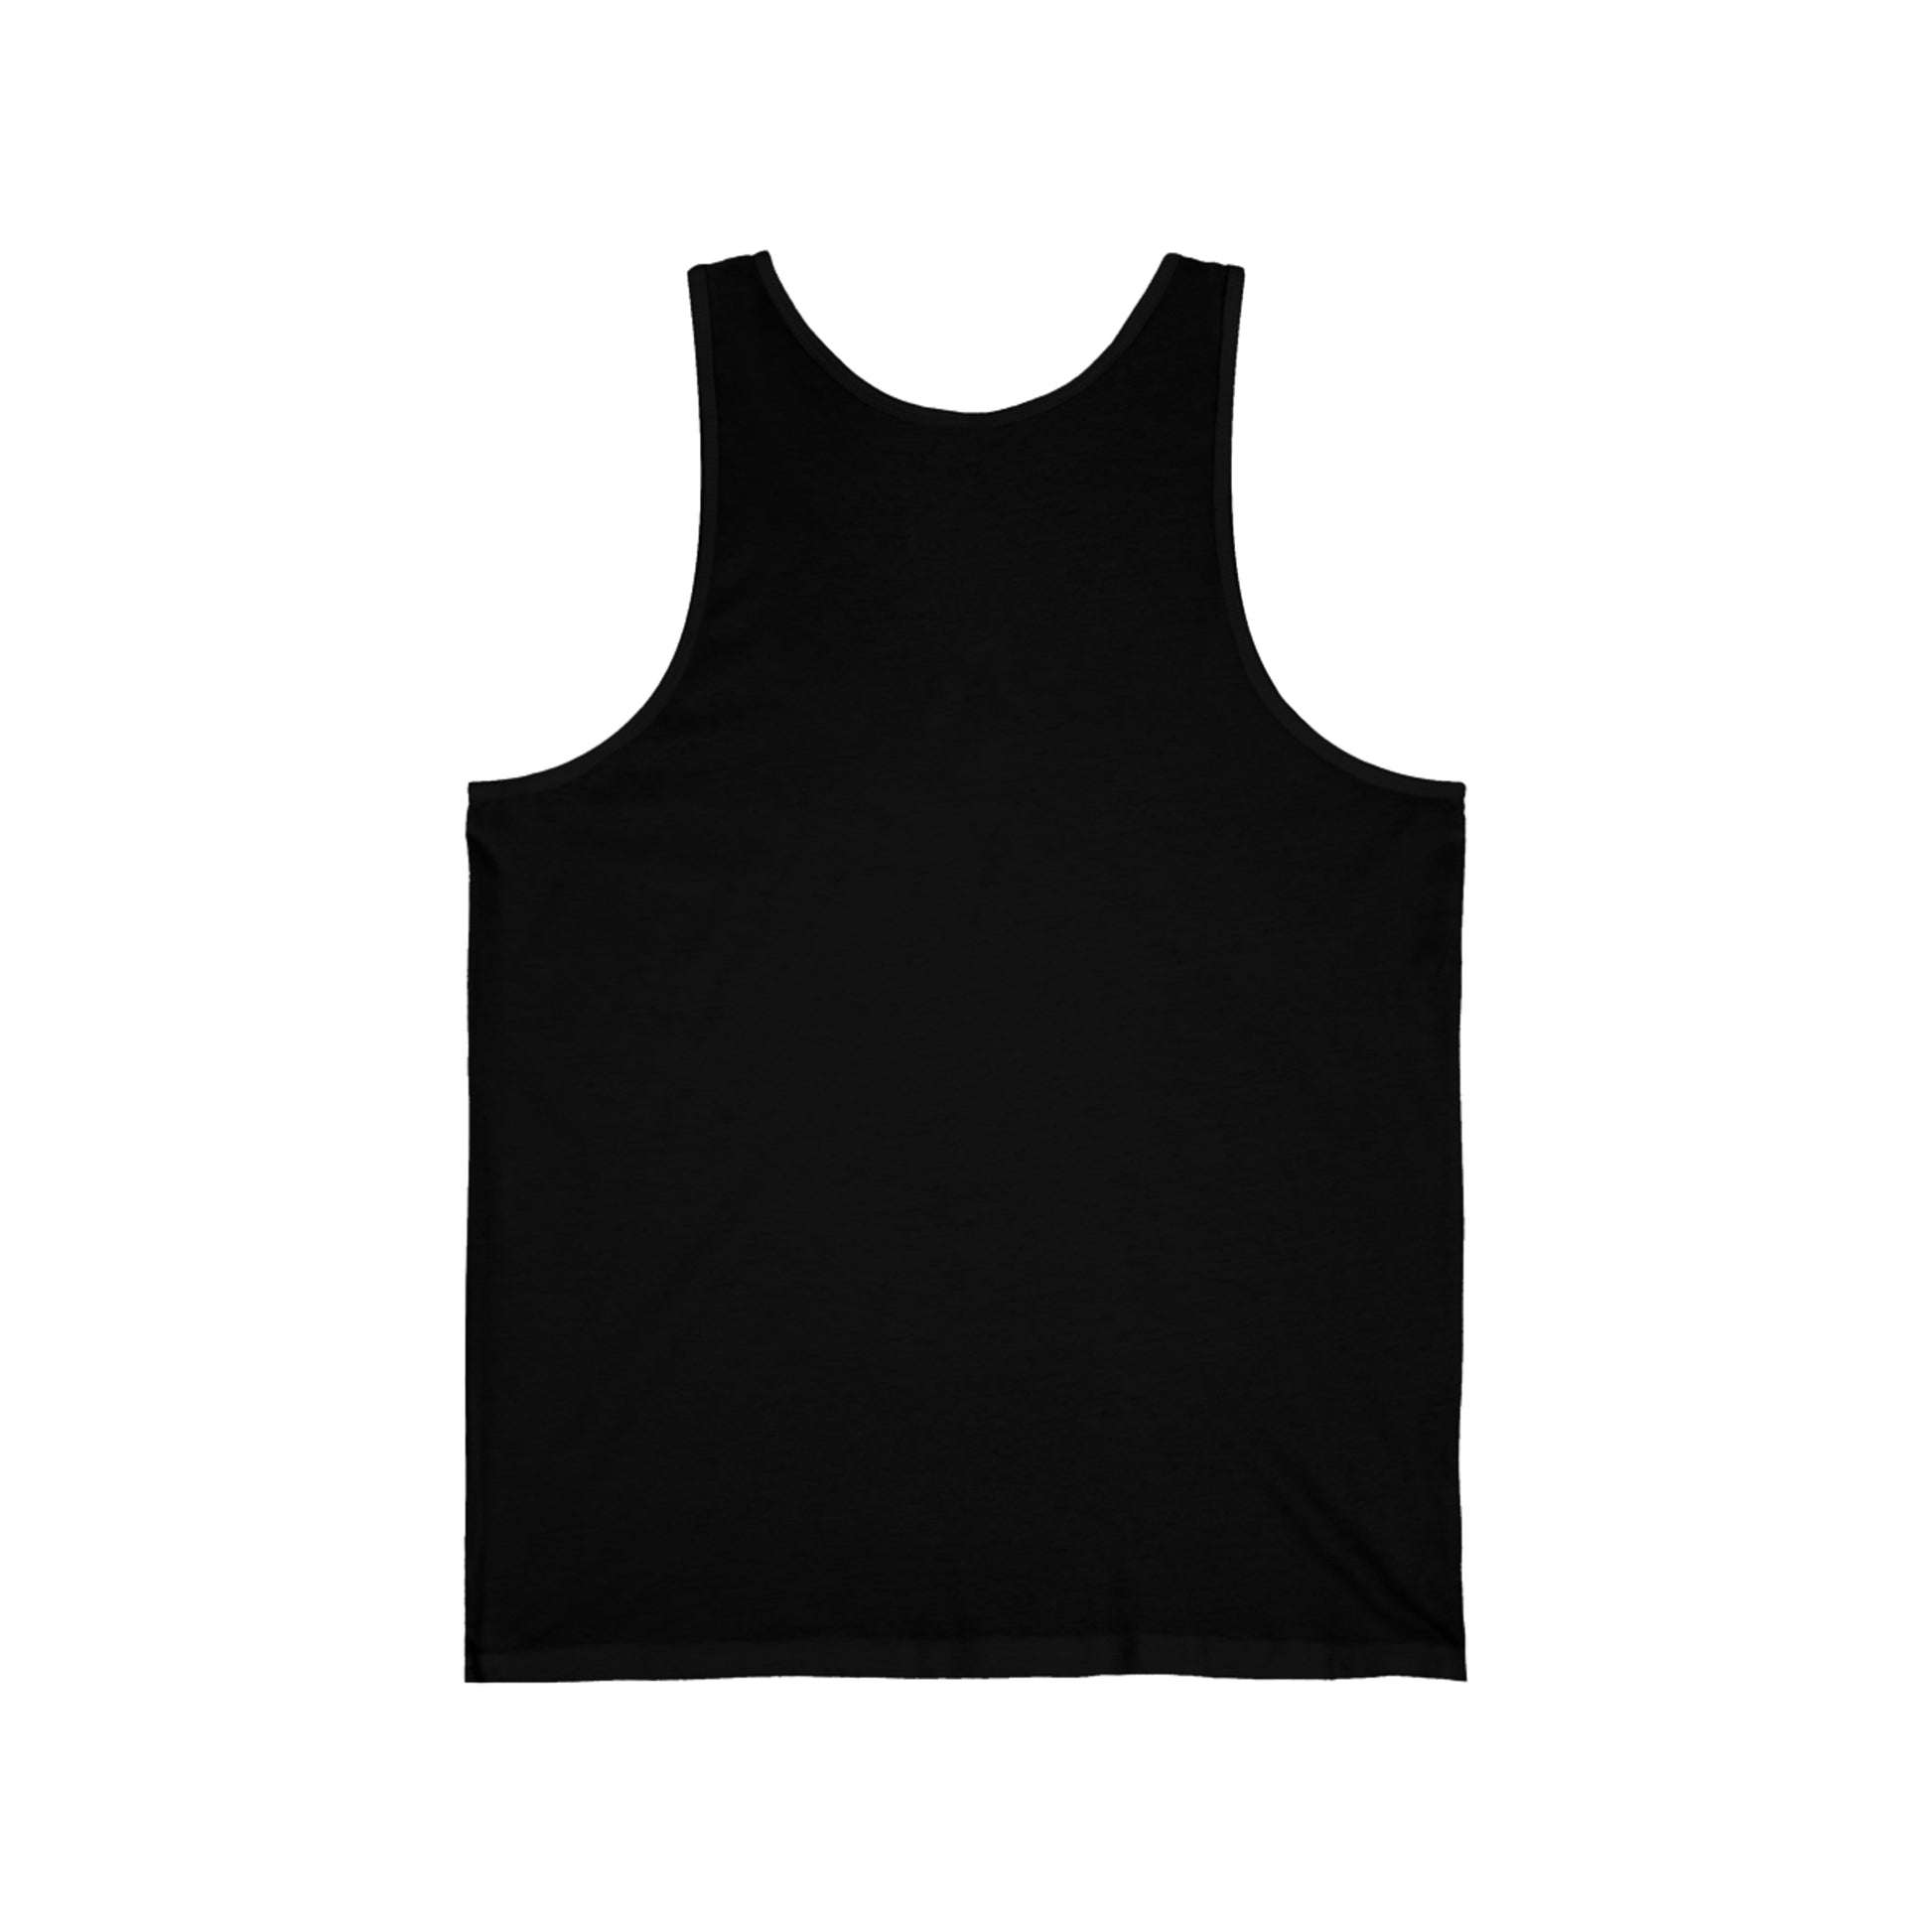 A plain black Unisex Jersey Tank displayed on a white background, purchased in Cabbagetown, Toronto. The top has a scoop neckline and wide shoulder straps.